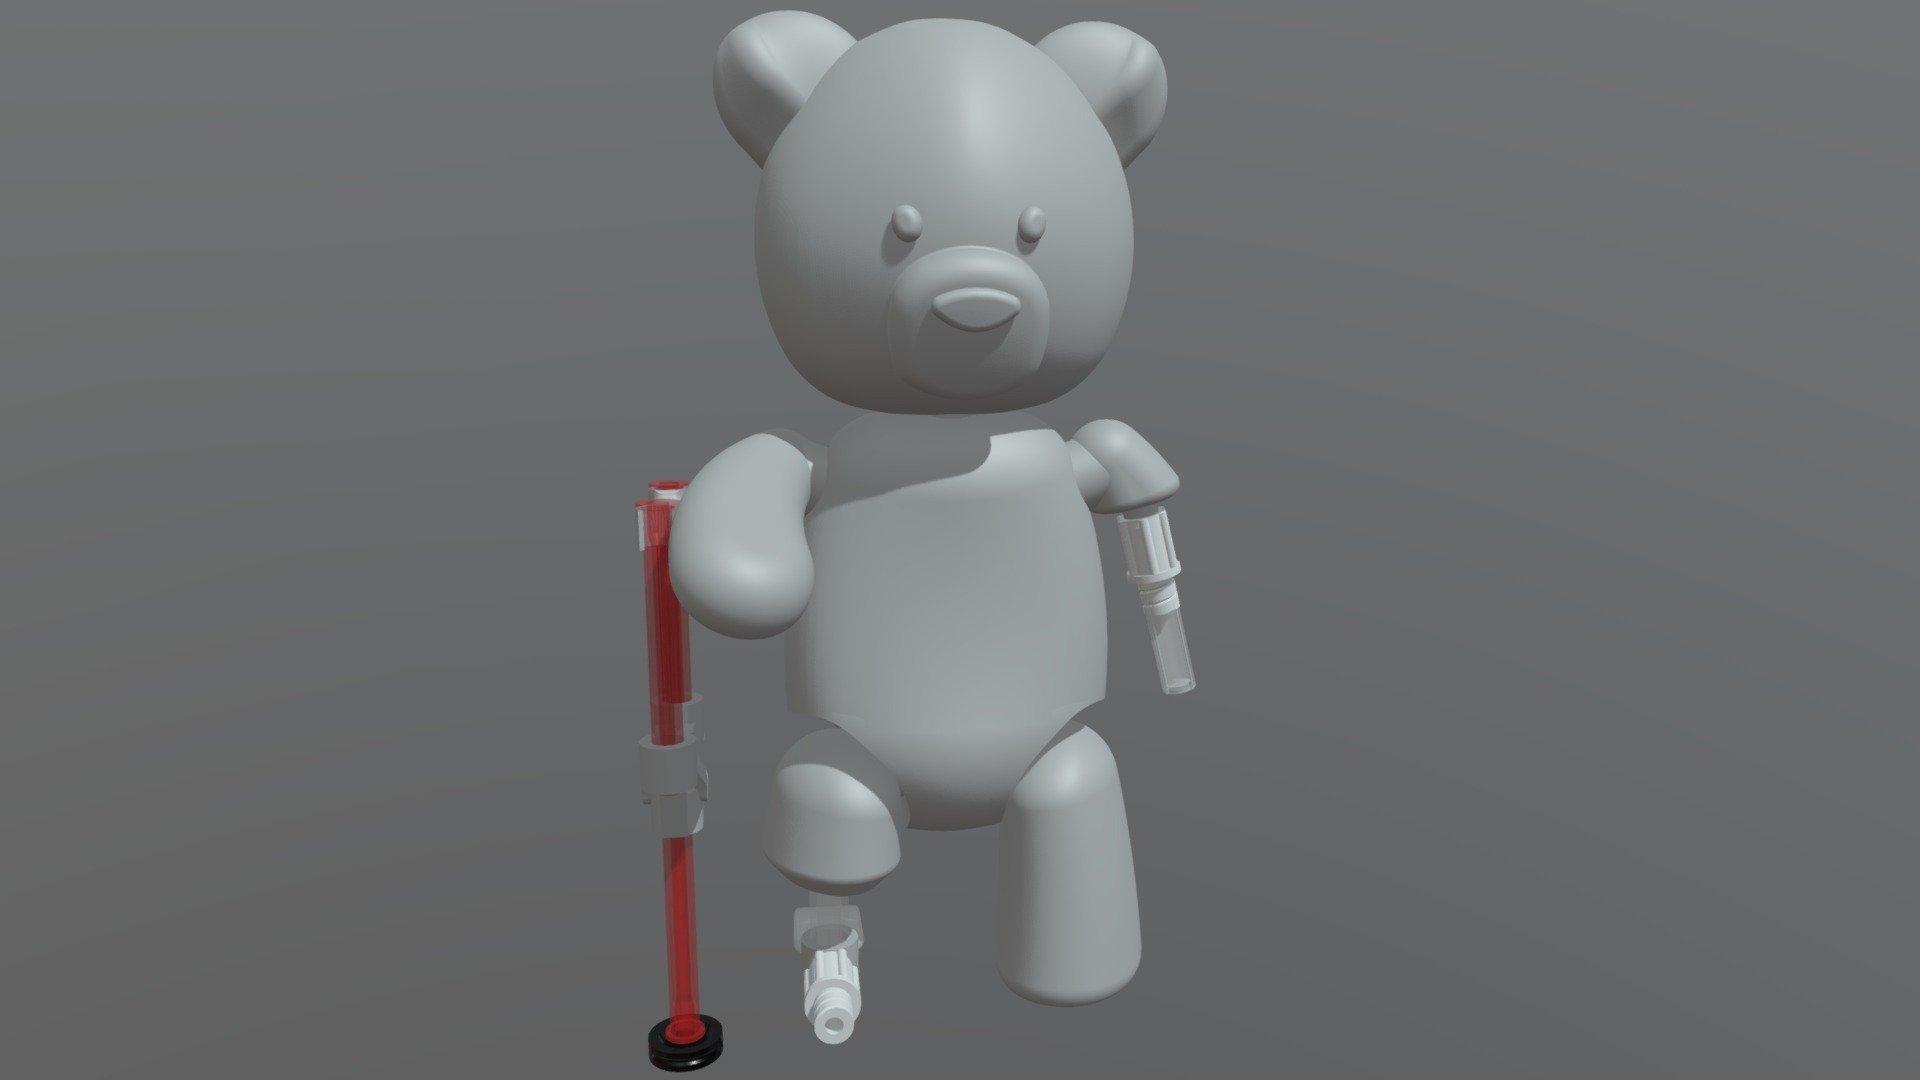 Need to shorten dat name
made for uni, is not real bear, is toy
could be used educationally to teach kids in the hospital about prosthetics in the most positive way :)
gonna remove this things limbs now he's never gonna get them back
Toto lost his limbs drunk driving and now his wife is getting a divorce OK GOODNIGHT KIDS 3d model